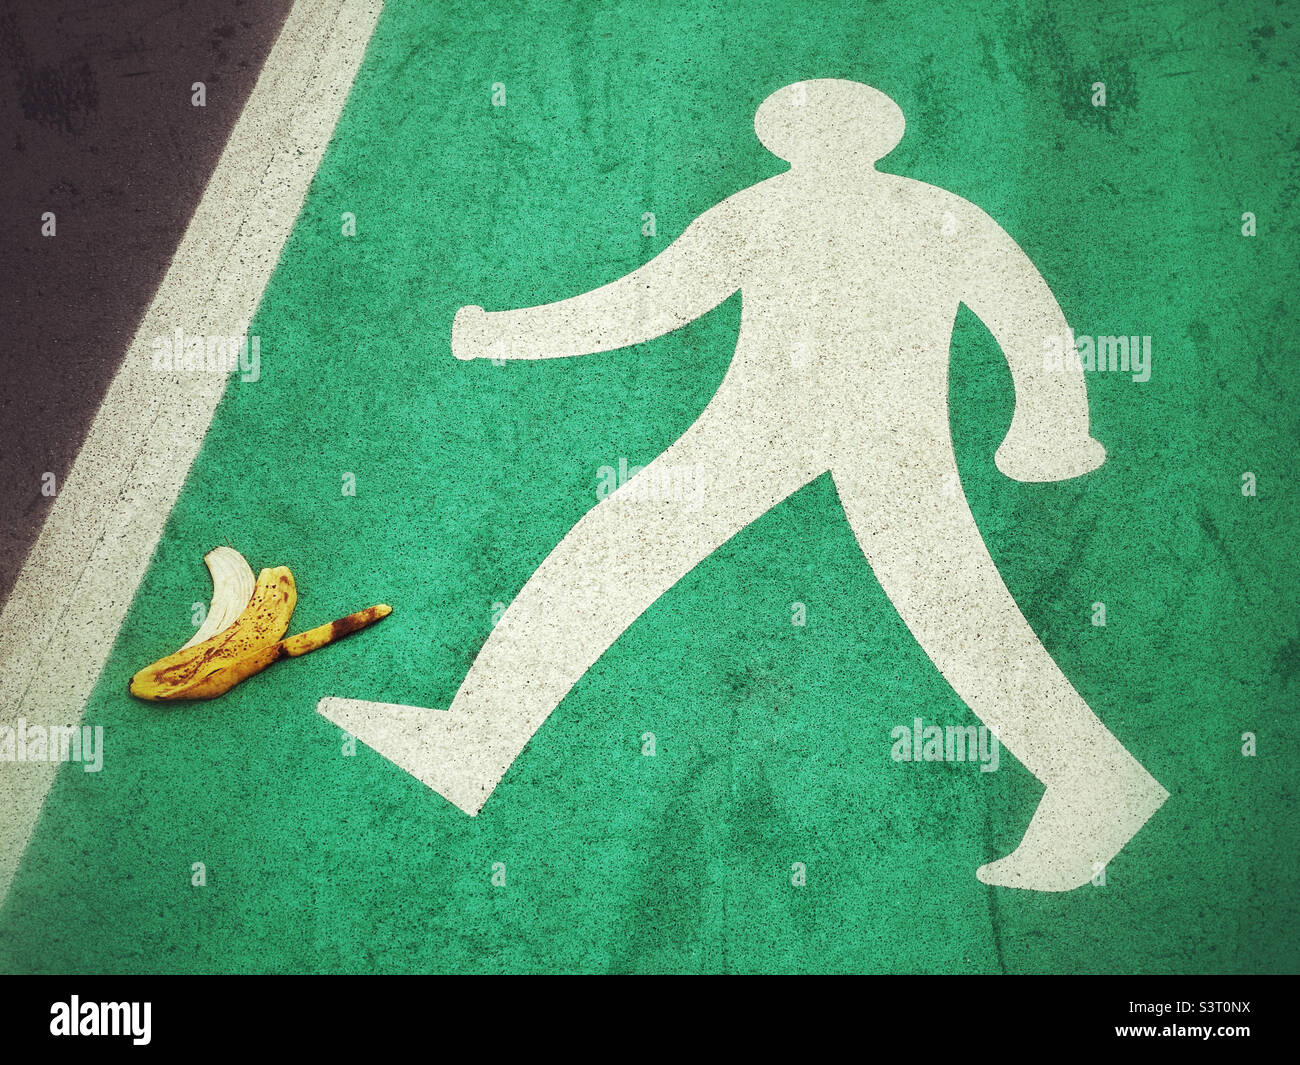 Beware! Danger! Do not walk on the discarded banana skin! Hazard ahead. Look where you are walking. Keep your eyes peeled! Photo ©️ COLIN HOSKINS. Stock Photo